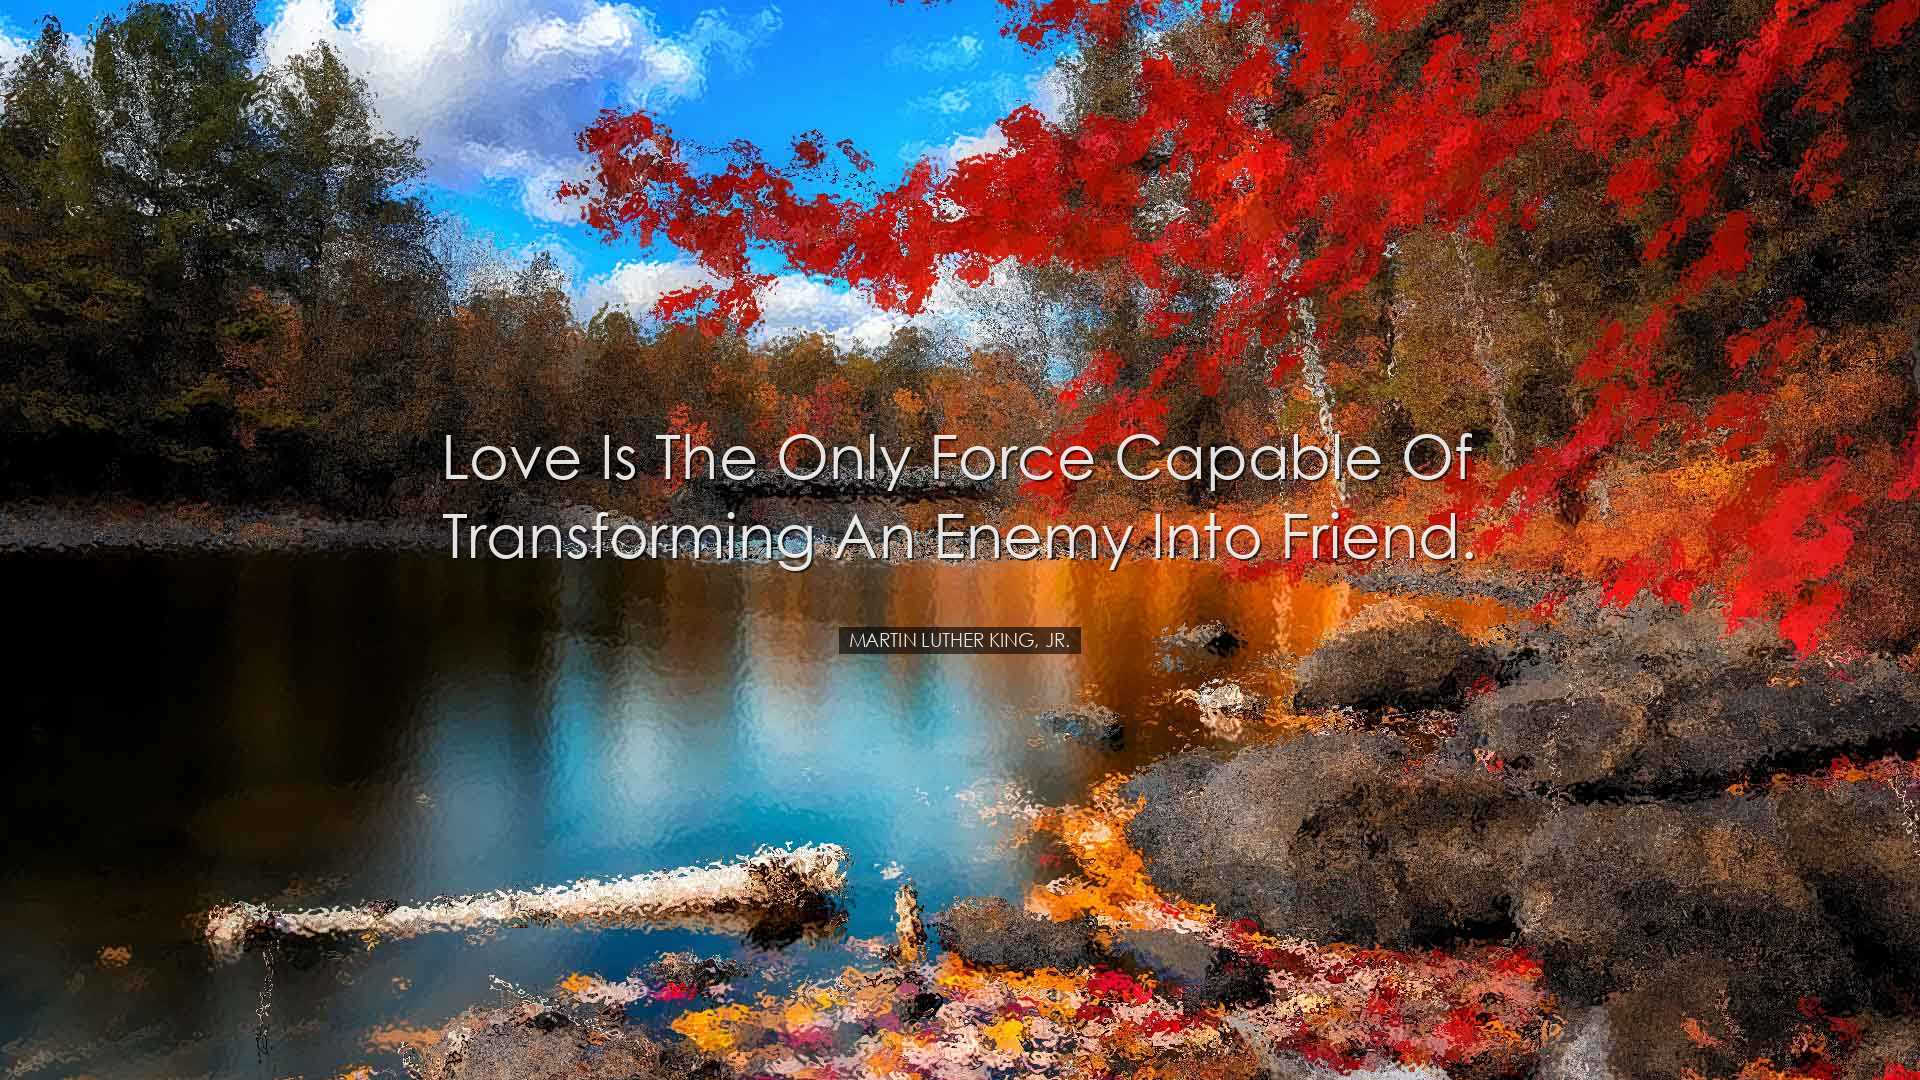 Love is the only force capable of transforming an enemy into frien